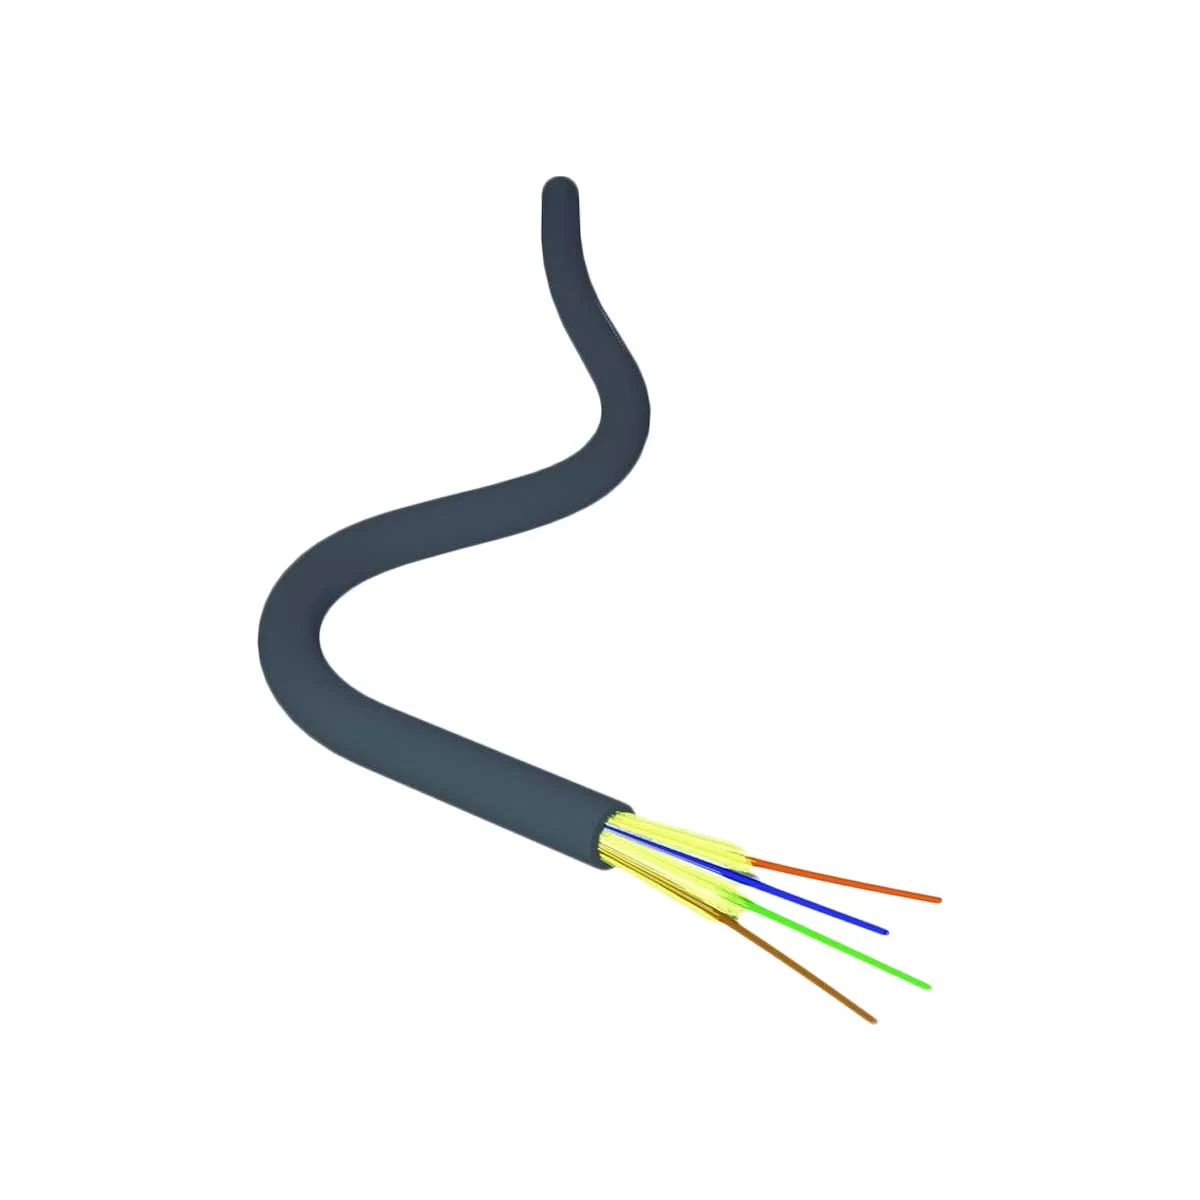 Paramount 4 Core Optical Fiber Network Cable price in BD